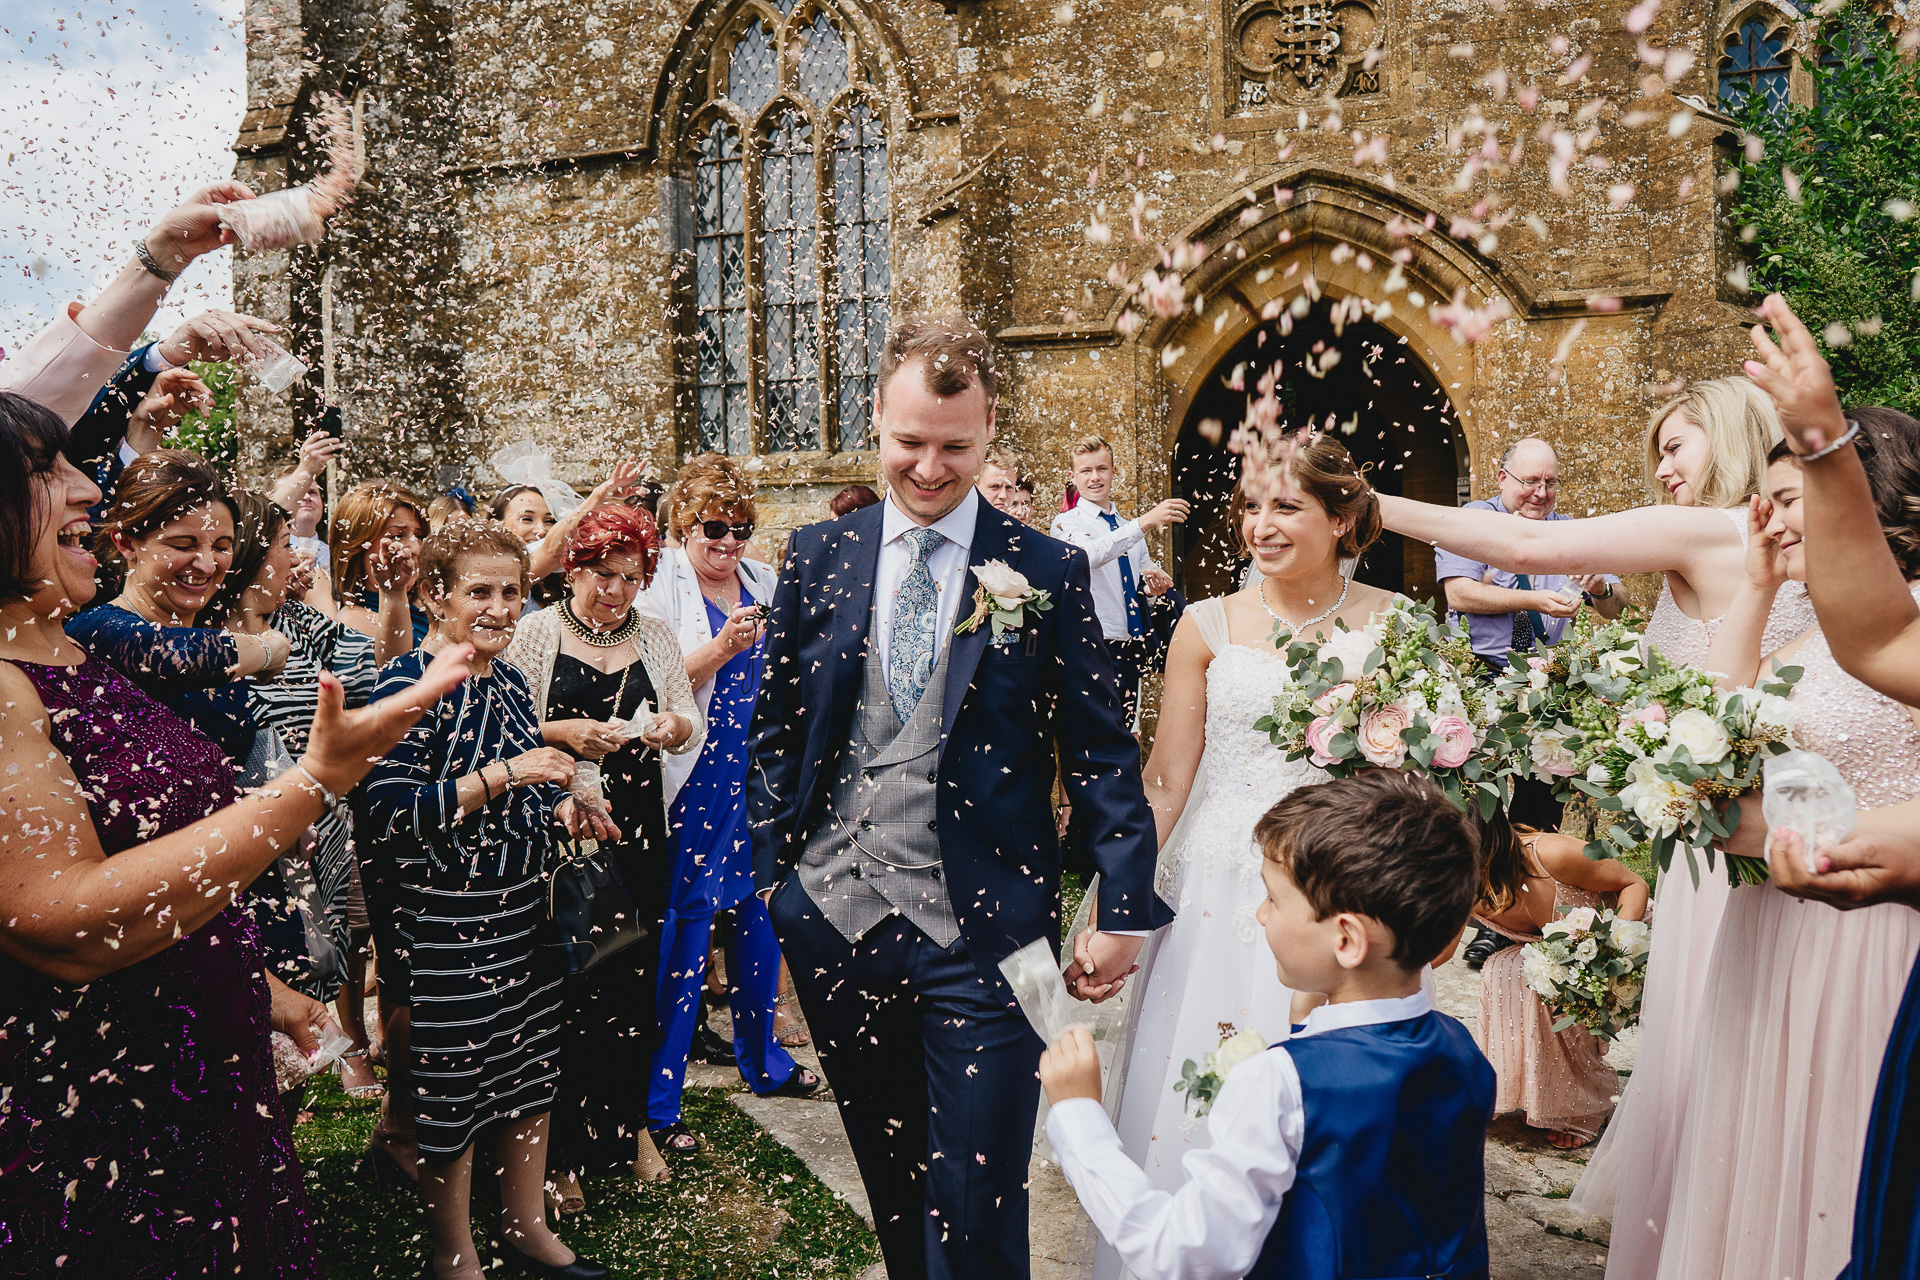 Bride and groom leaving church in a cloud of confetti